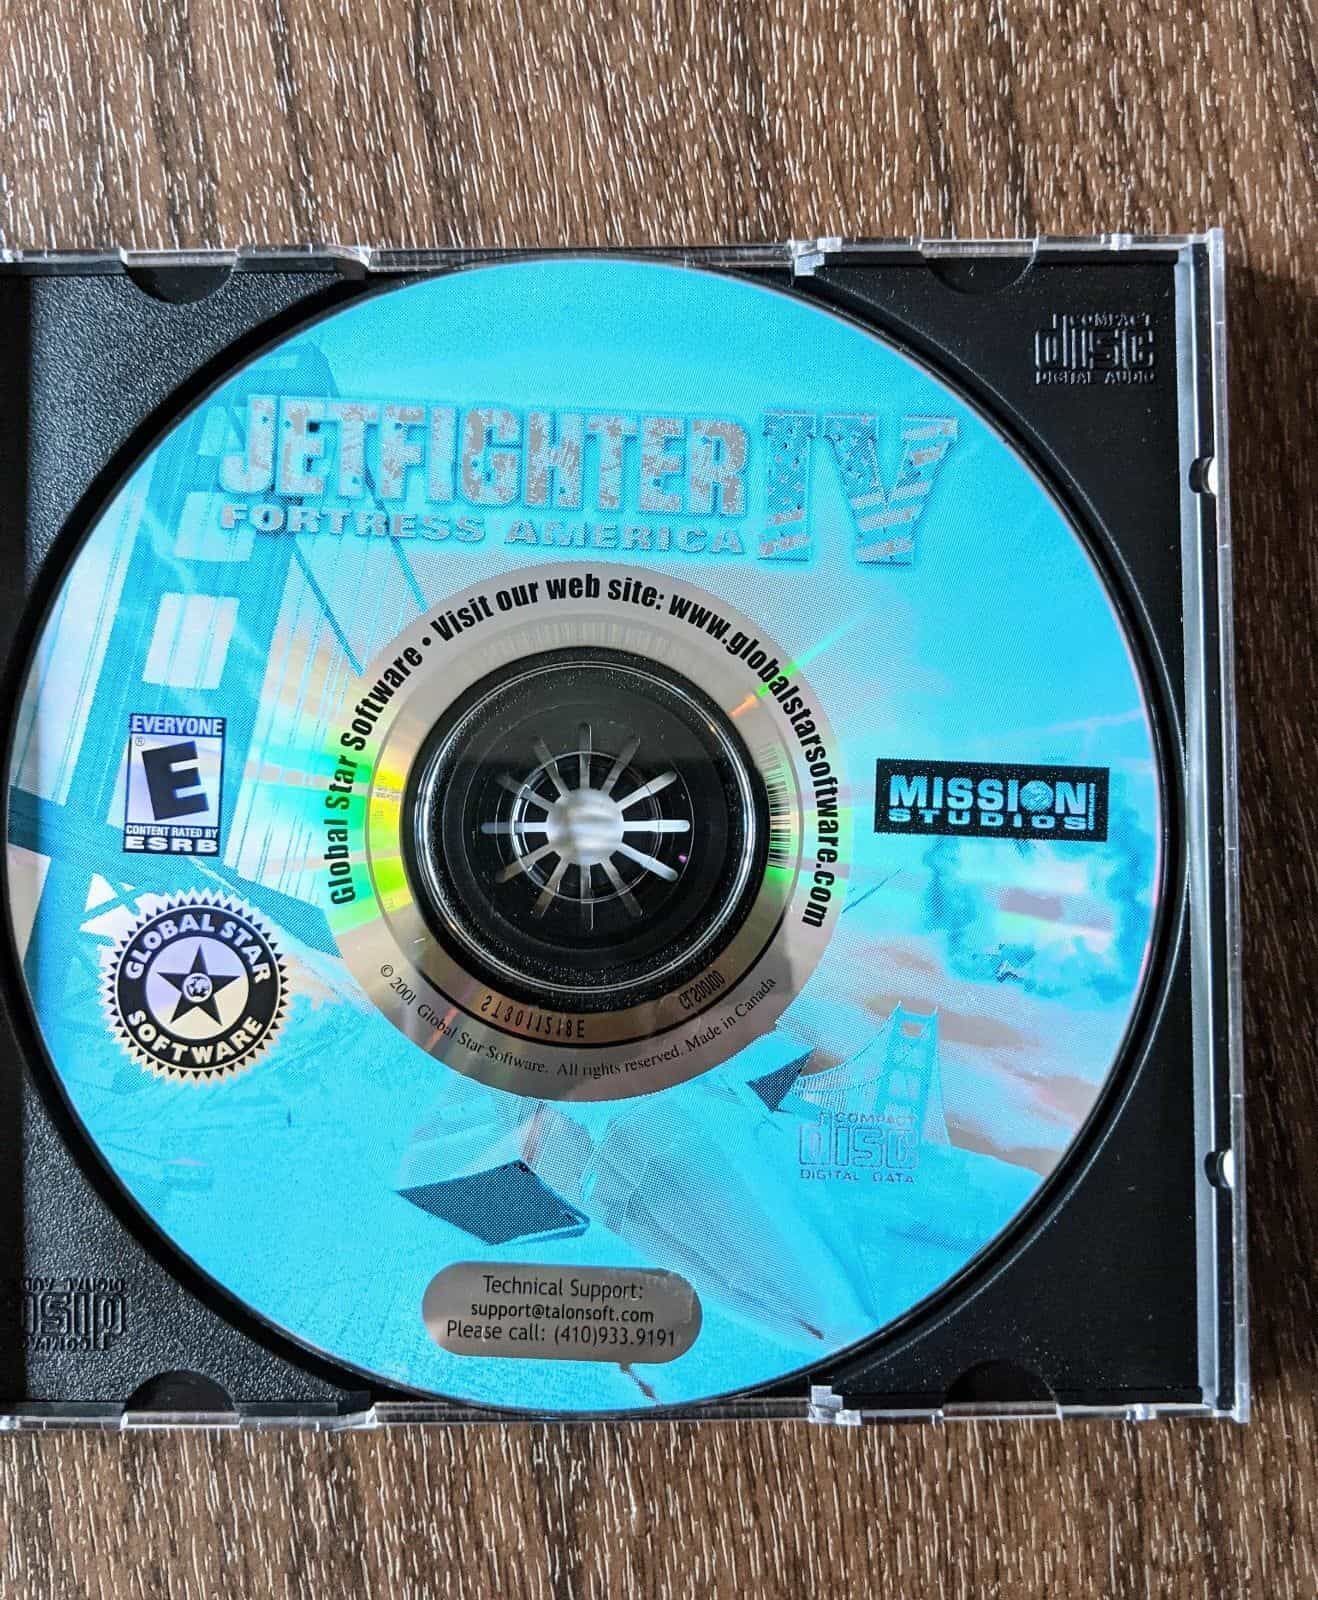 Jetfighter IV Fortress America PC Game